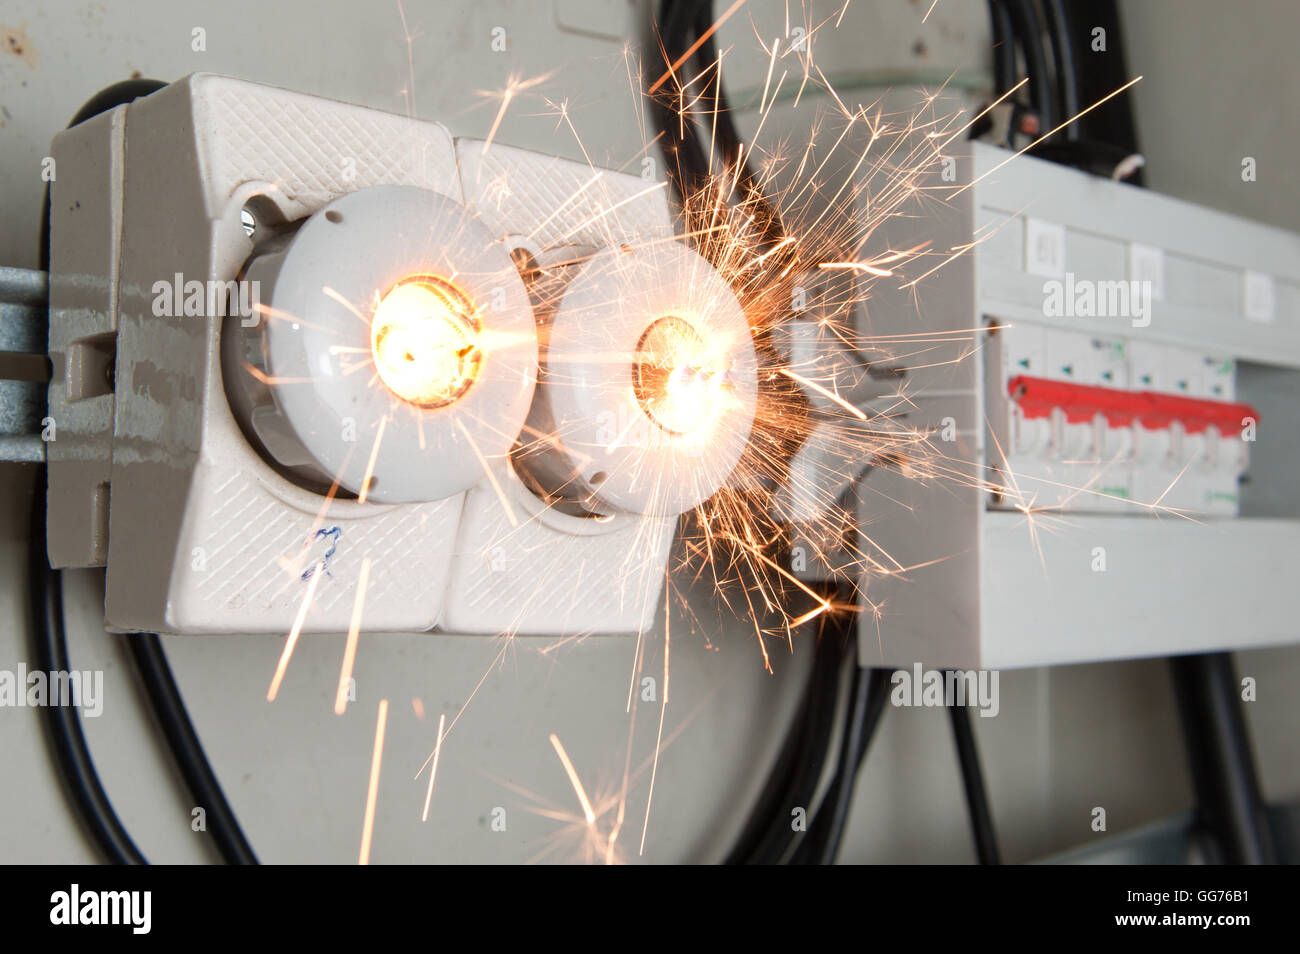 Overloaded electrical circuit causing fuse to break Stock Photo